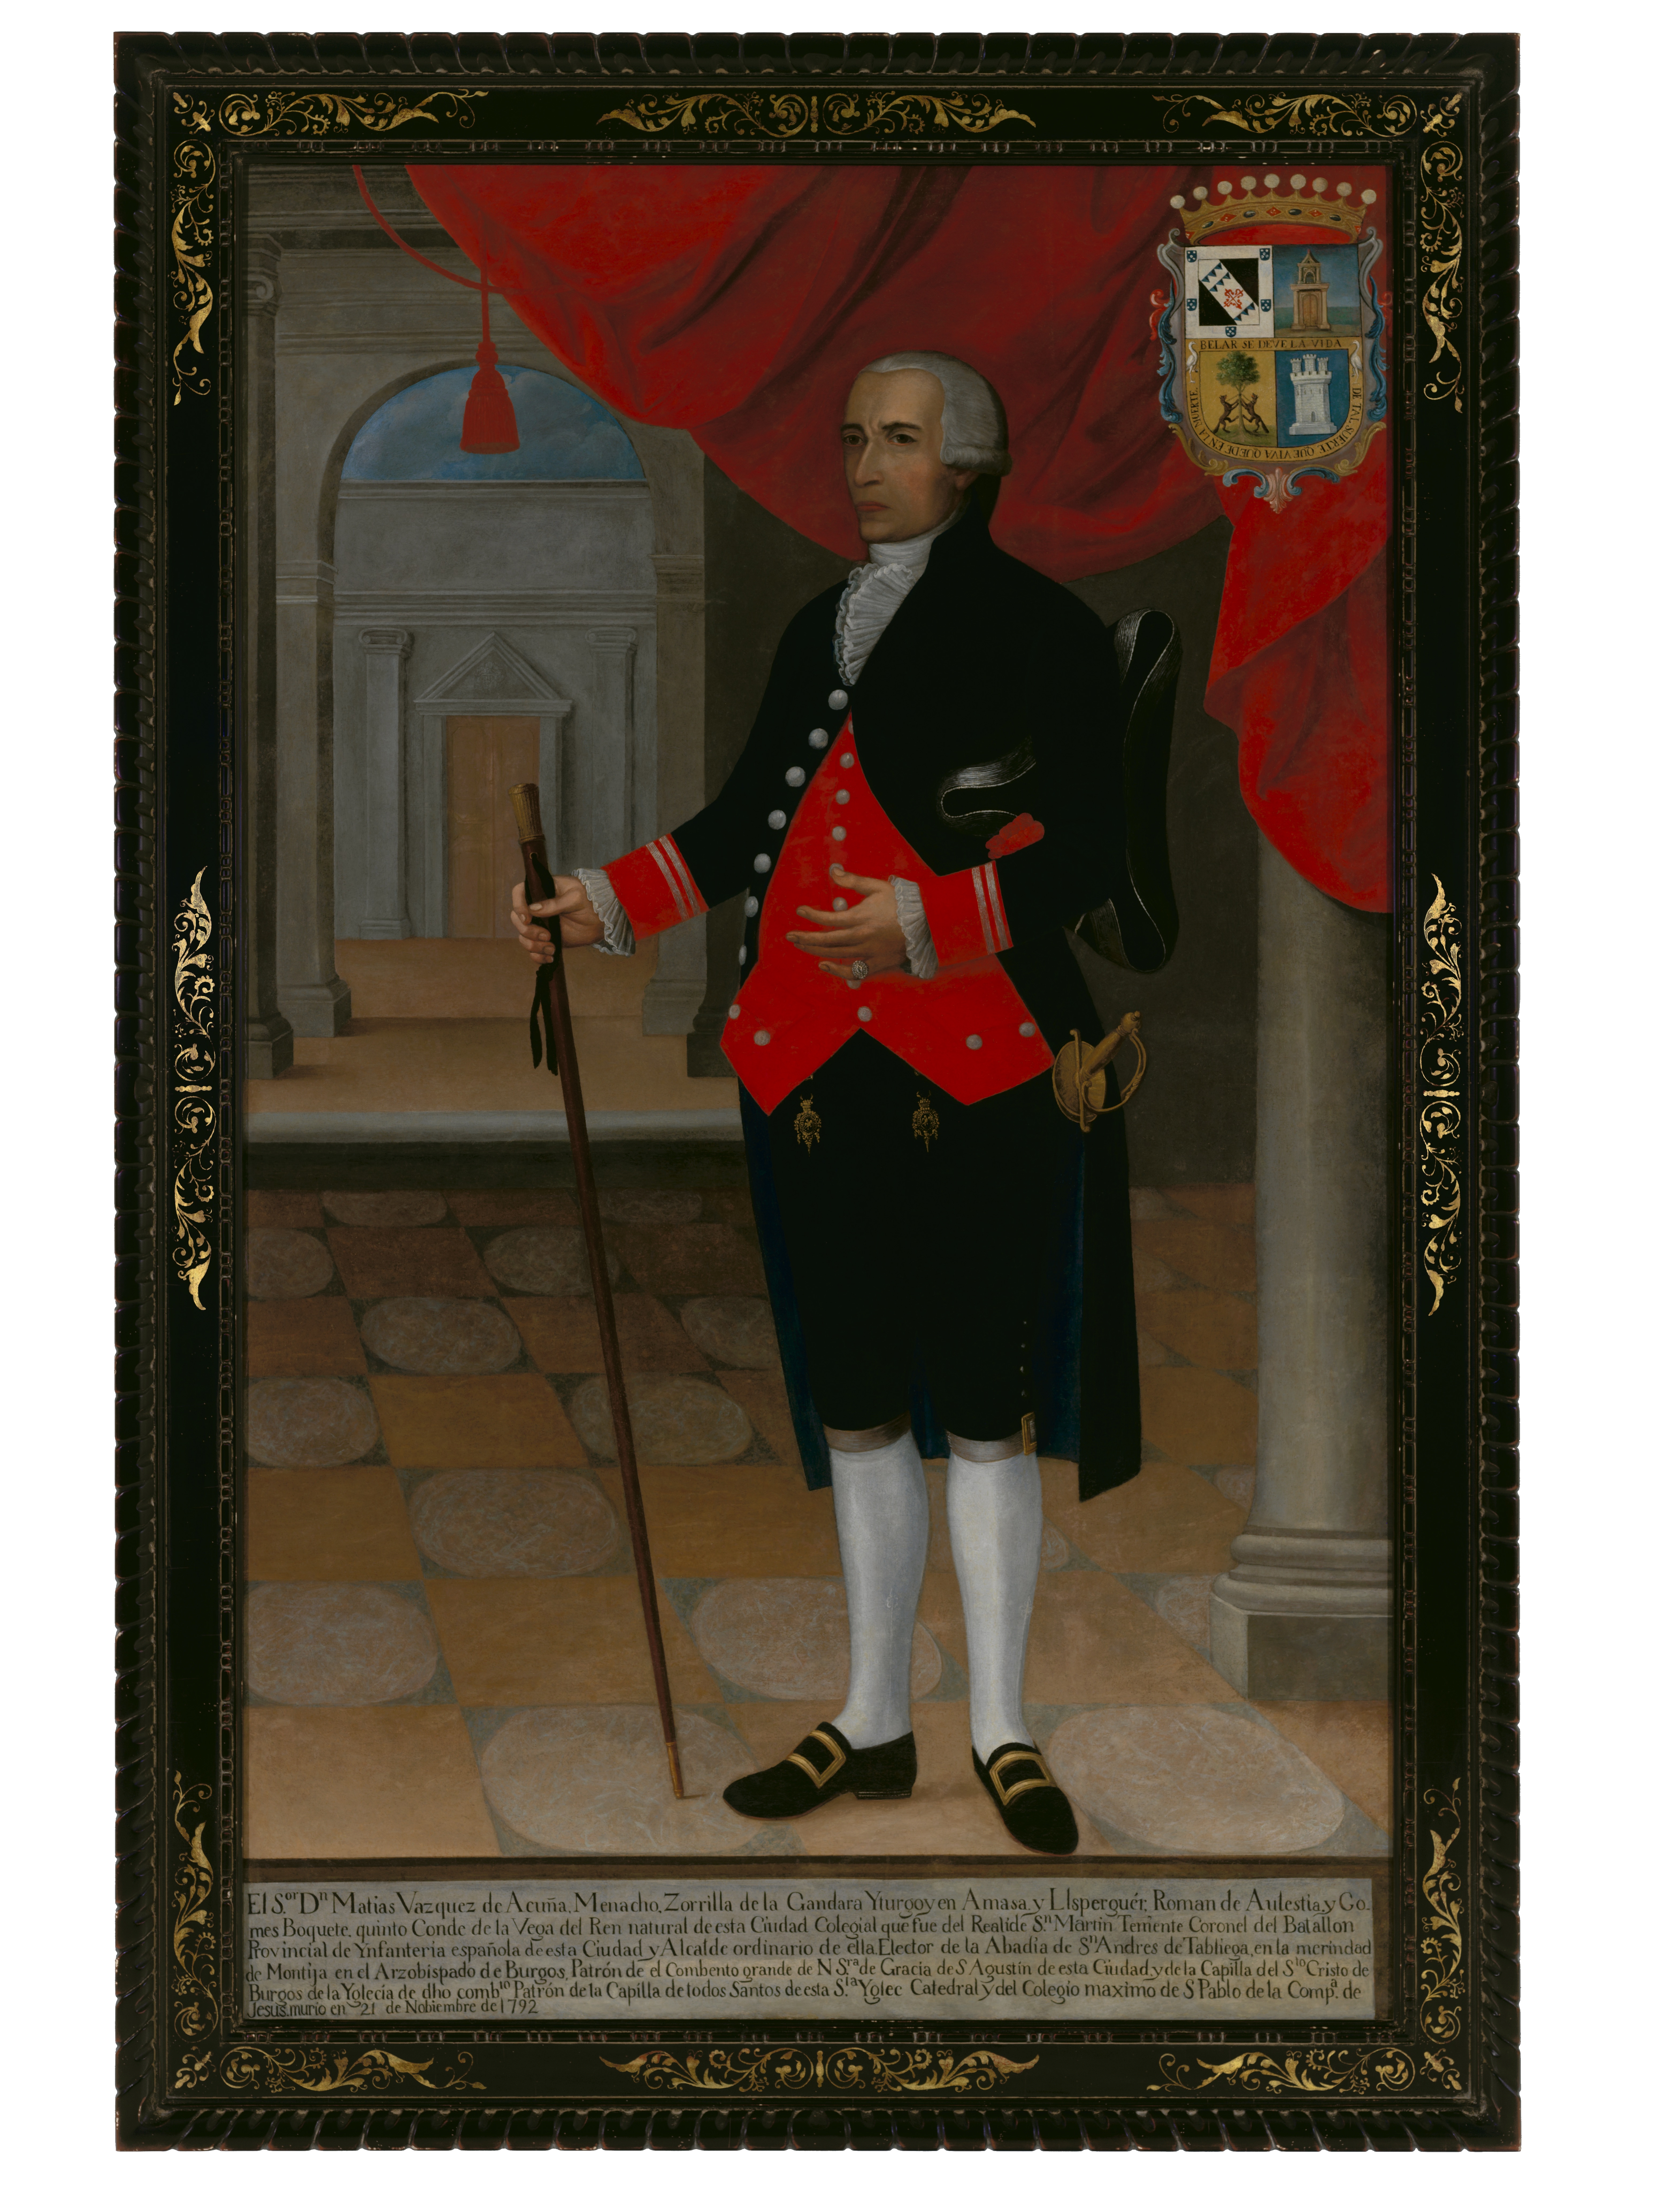 A painting depicting a man in an smart set of clothes standing in a large room with a red drape behind him. His coat of arms is in the top left corner while a block of text describing of his biography is at the bottom.